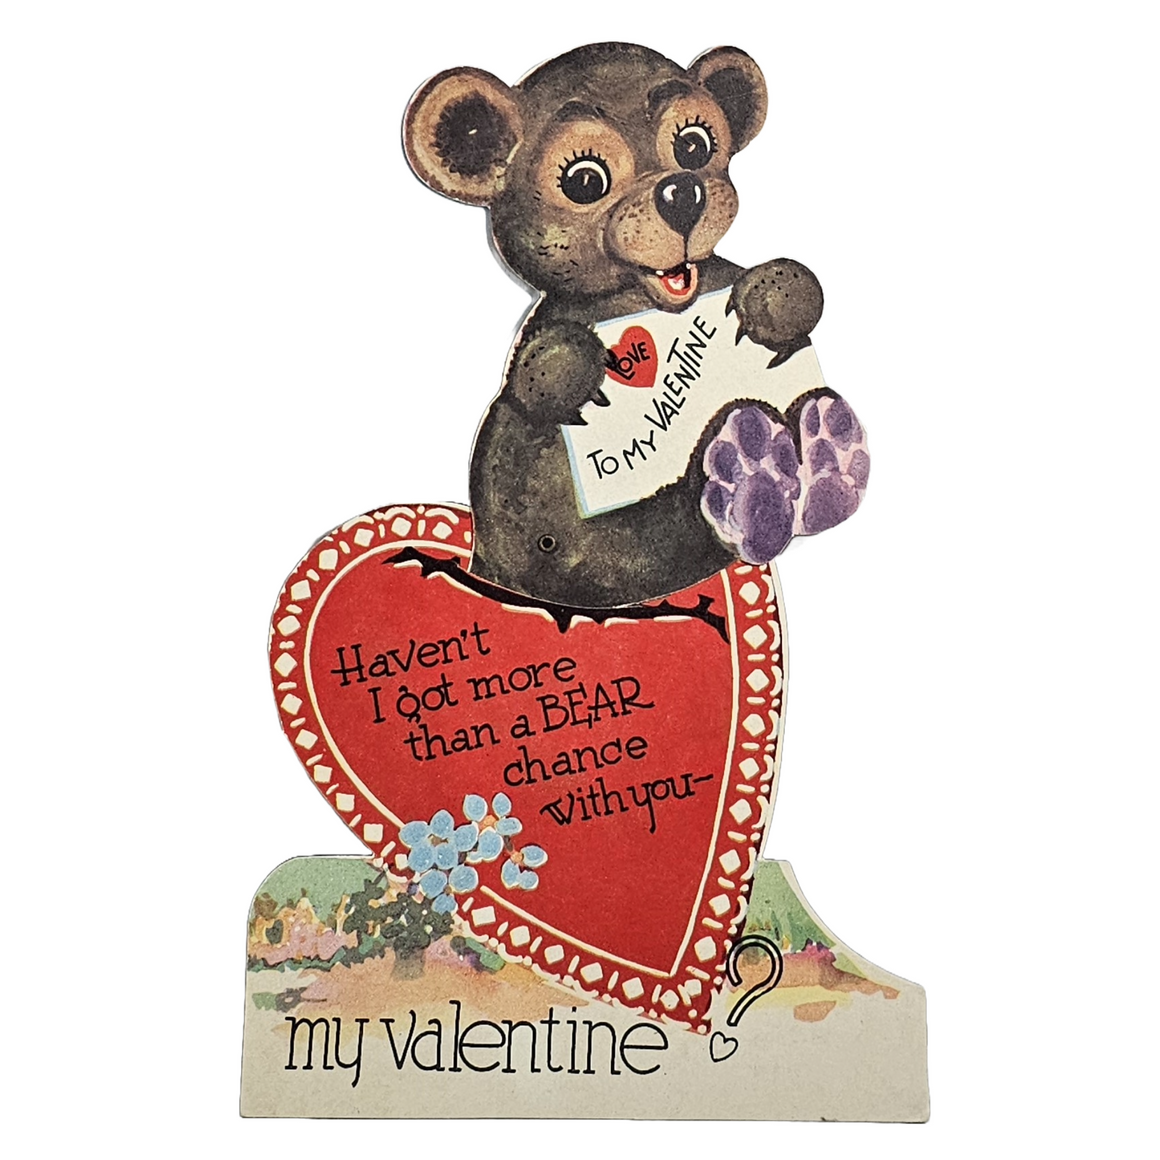 Larger Sized Mechanical Valentine Baby Cub Bear Holding Letter Moving Atop Heart